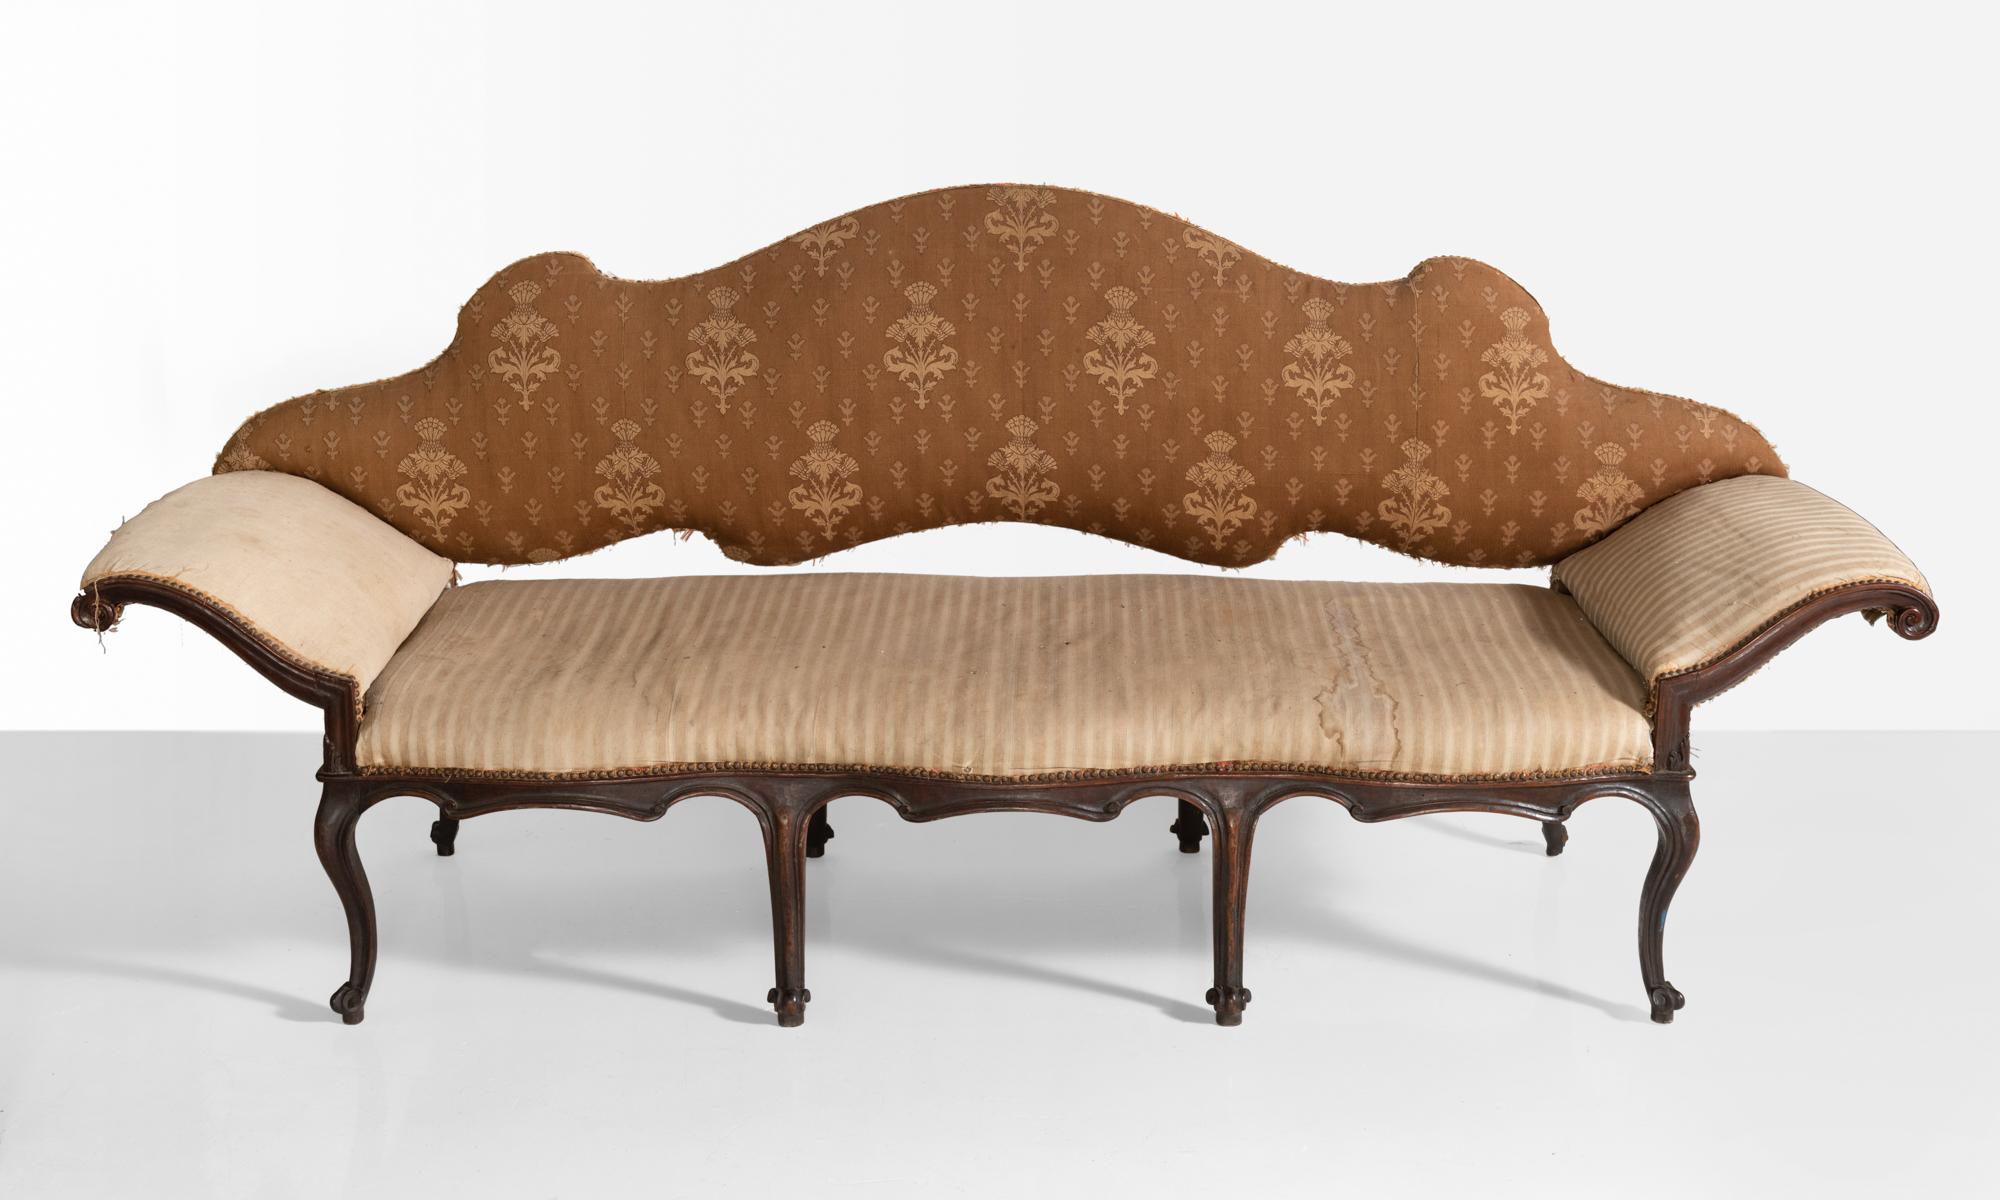 18th century walnut sofa, Italy, circa 1790

Wonderful and unique form with restored frame and original upholstery.